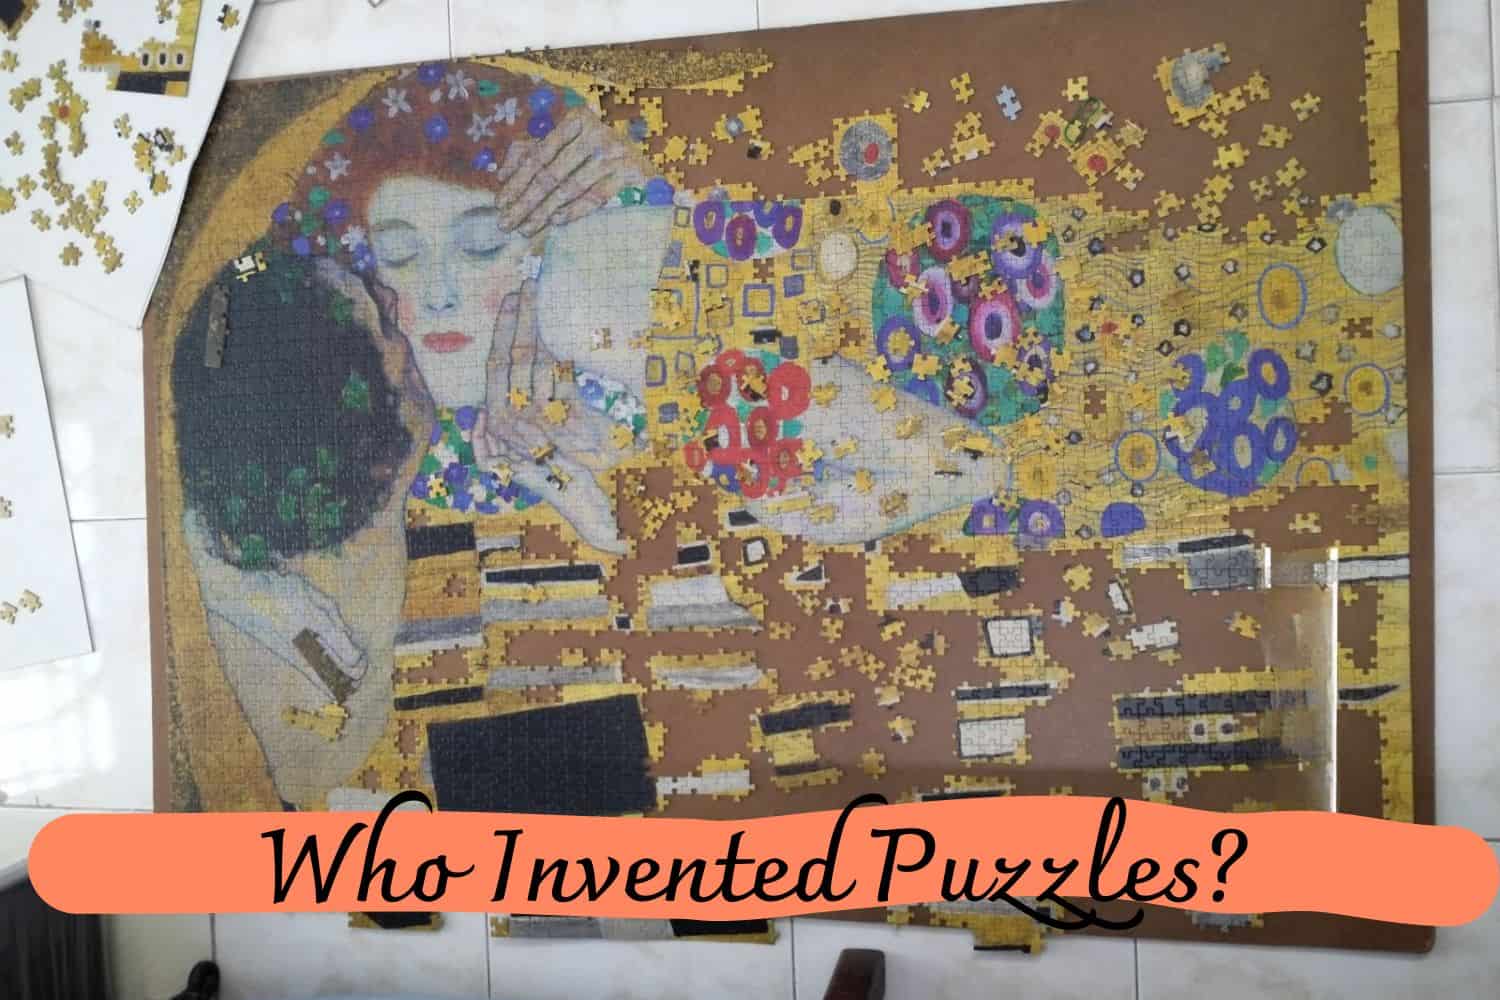 Who Invented Puzzles?